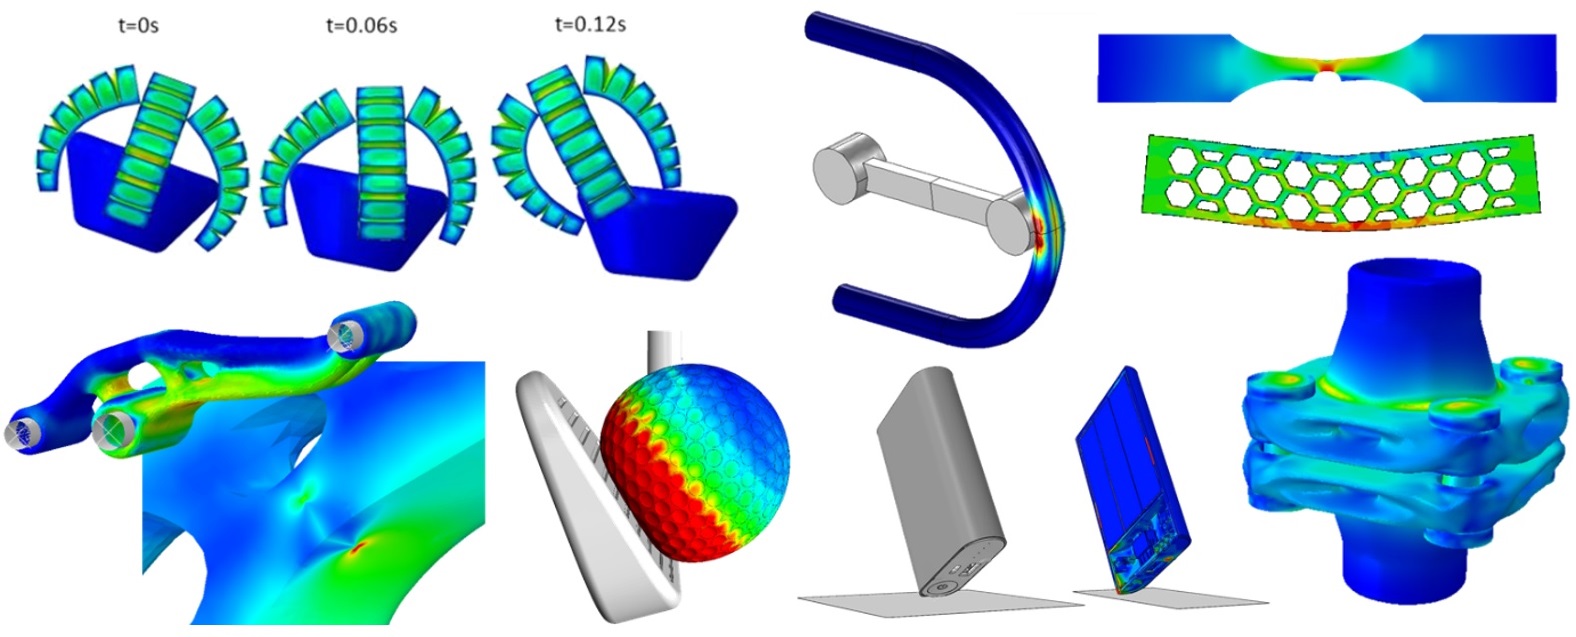 FEA examples